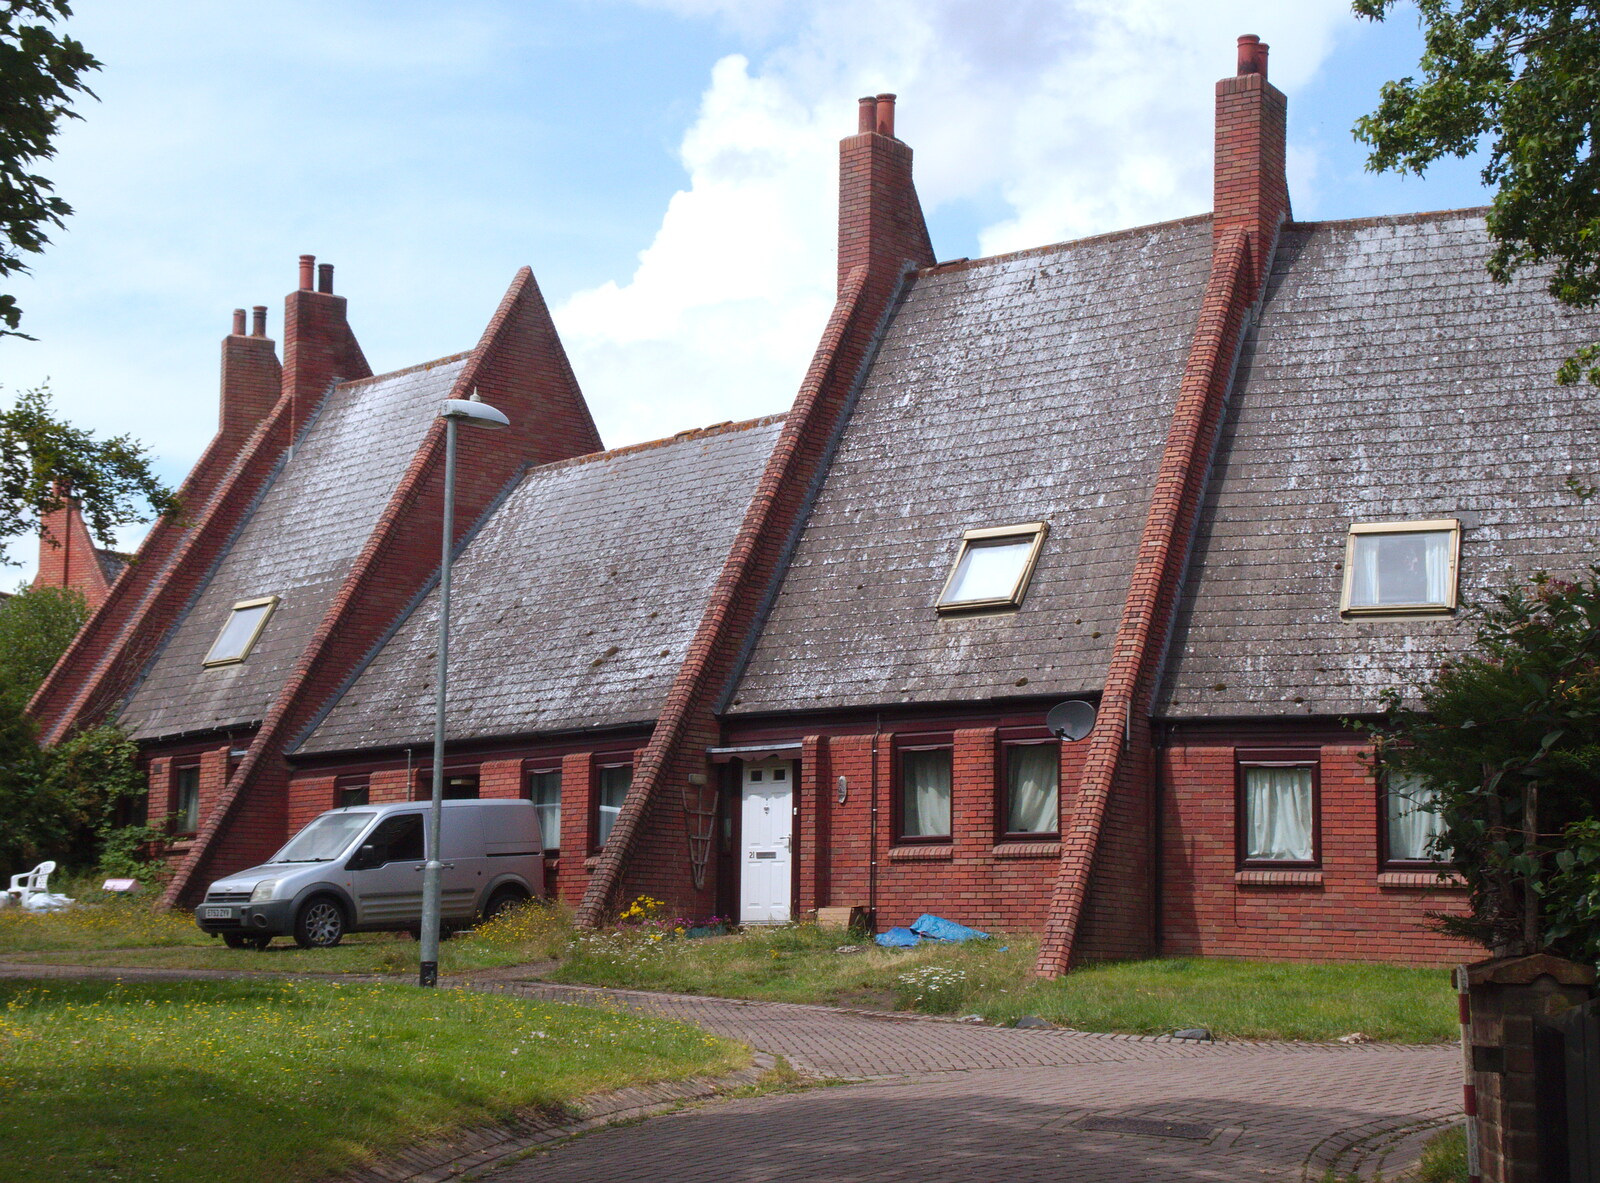 The striking triangle houses near the castle from The Sheep Trail, Eye, Suffolk - 20th July 2019